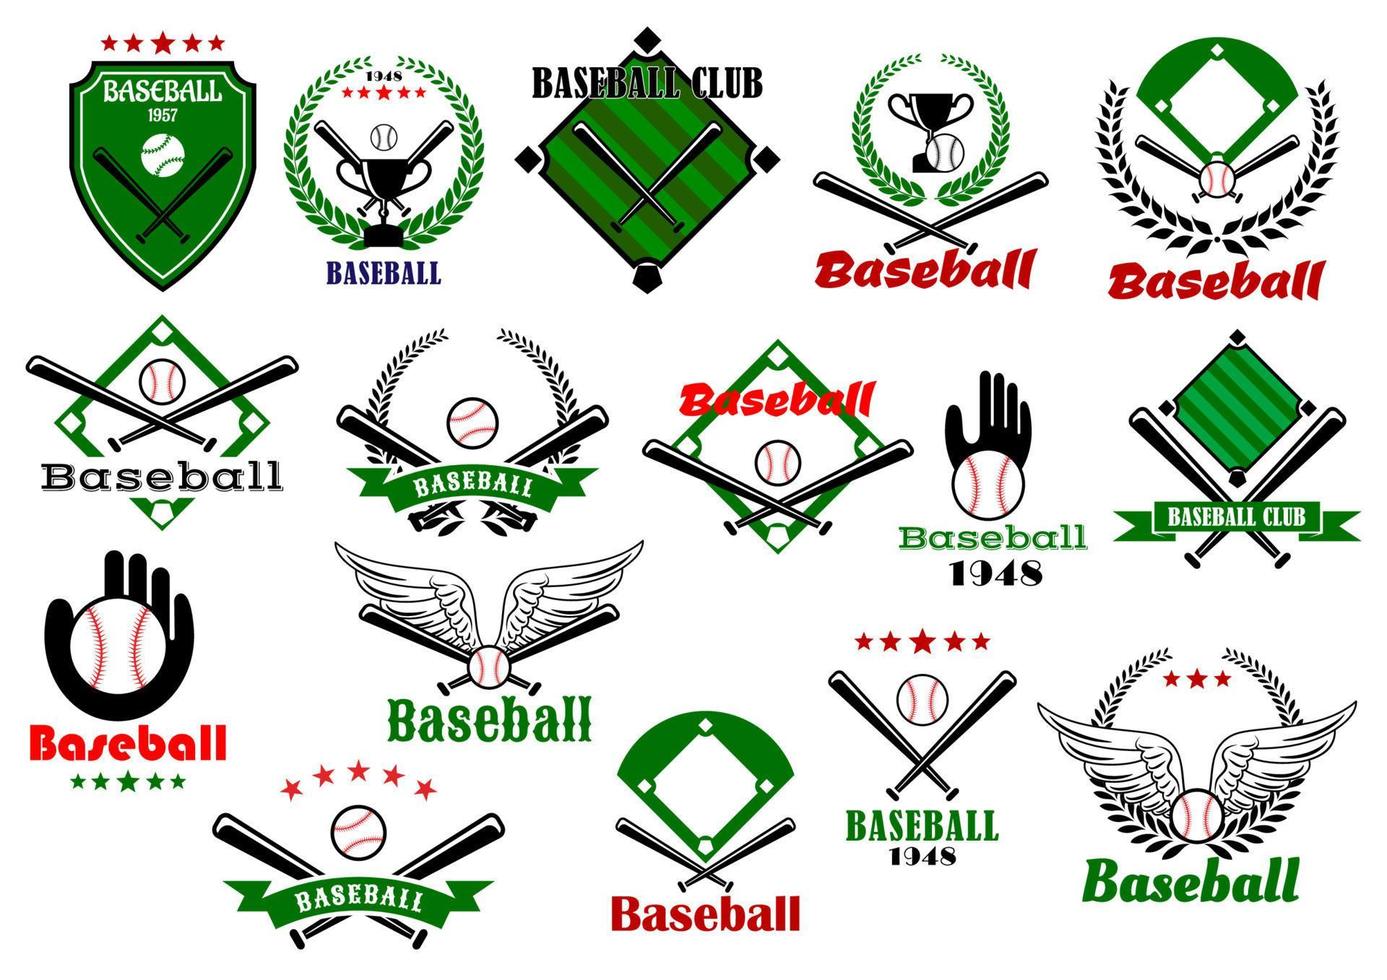 Baseball emblems or logo with game equipments vector